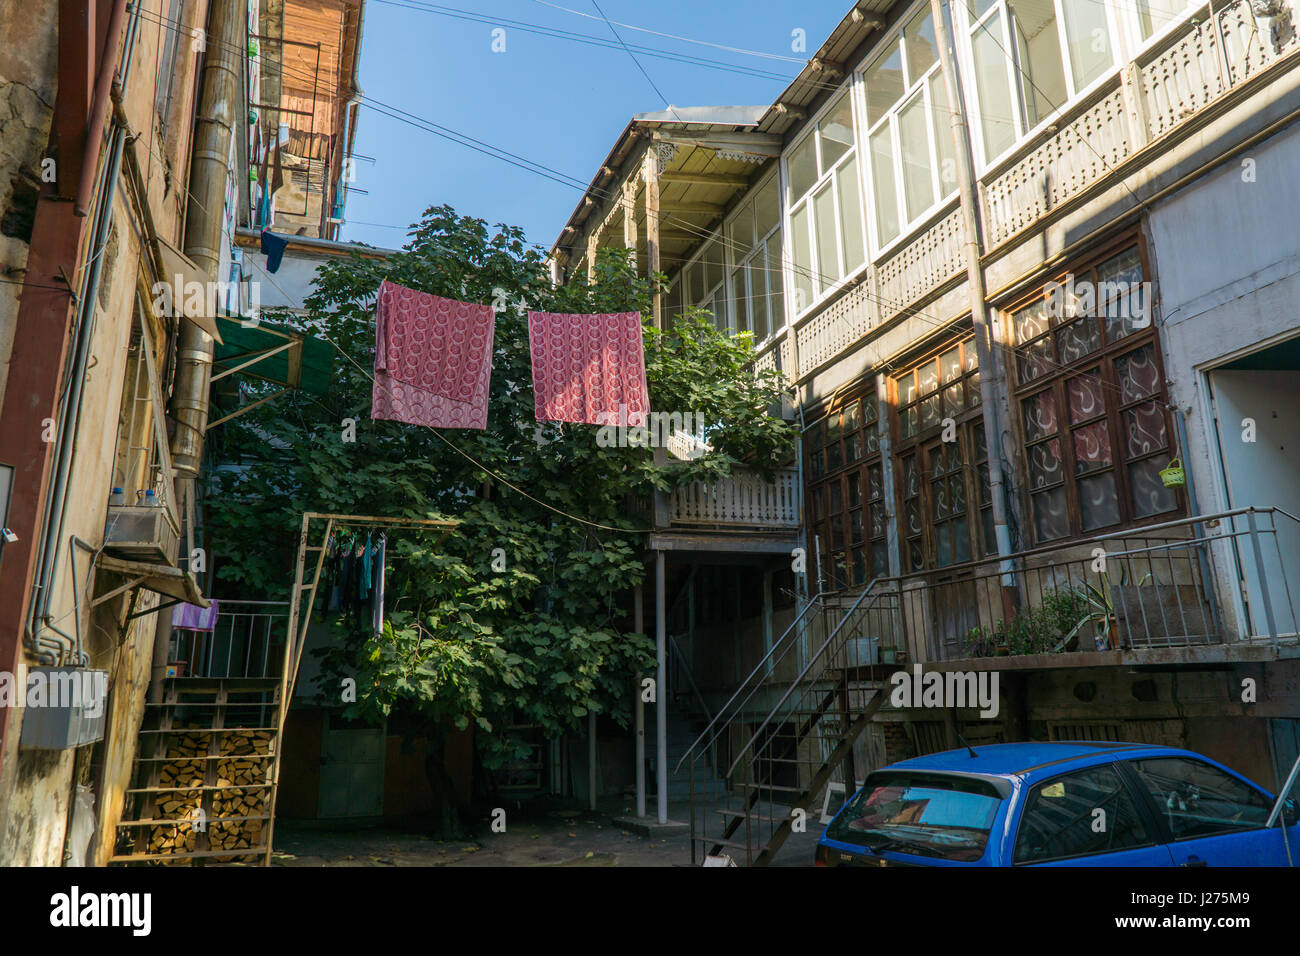 TBILISI, GEORGIA-SEP 25, 2016: Typical courtyard in the heart of the old town. Stock Photo